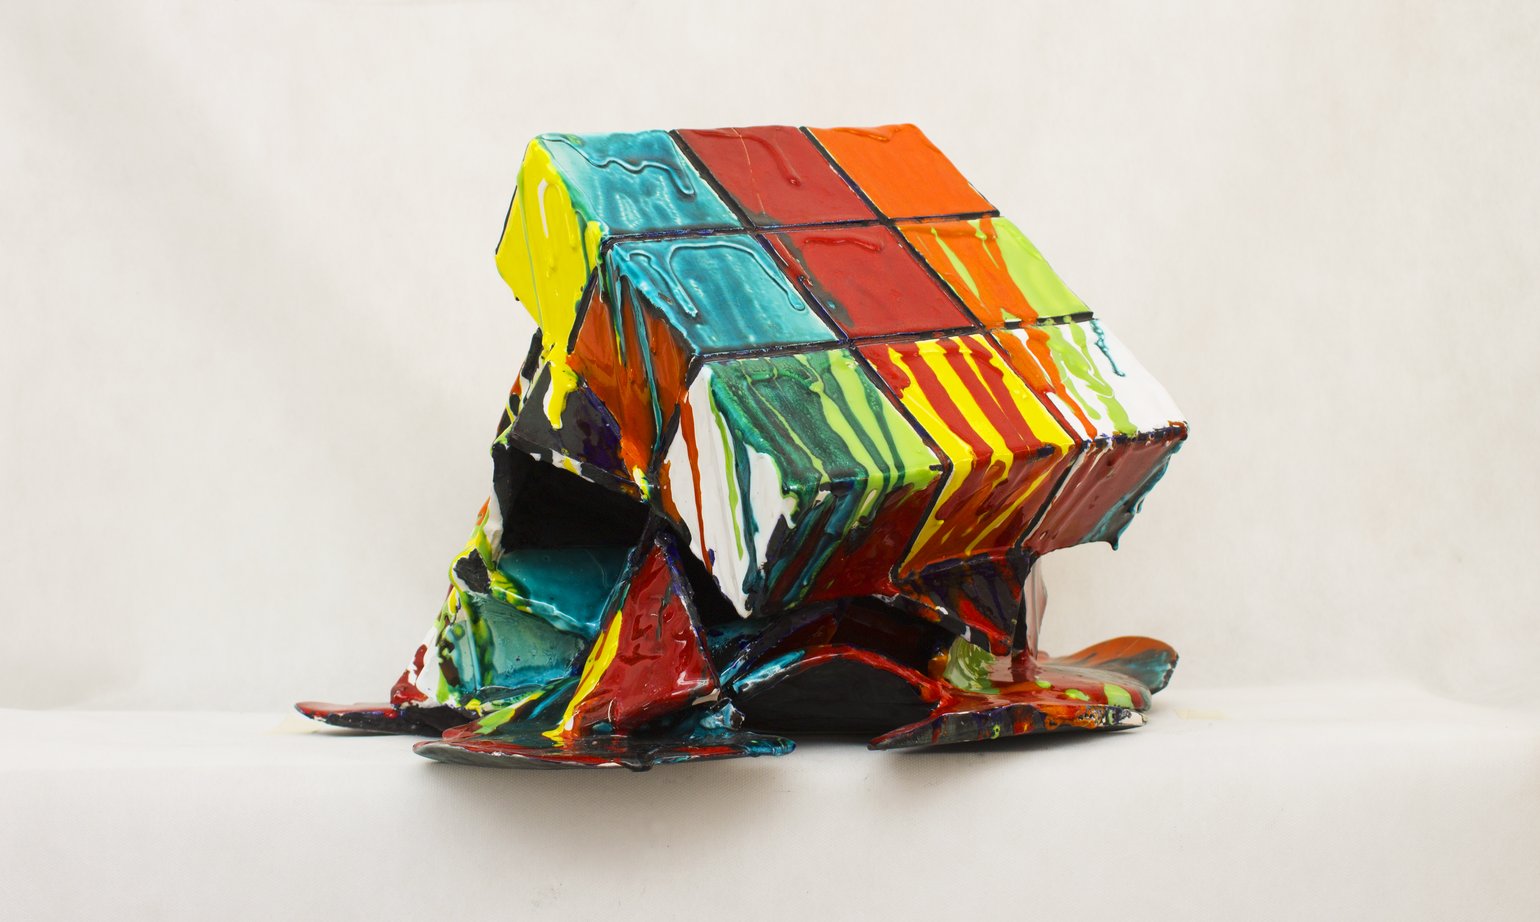 Image of Rubik's Cube / The Melted Cube